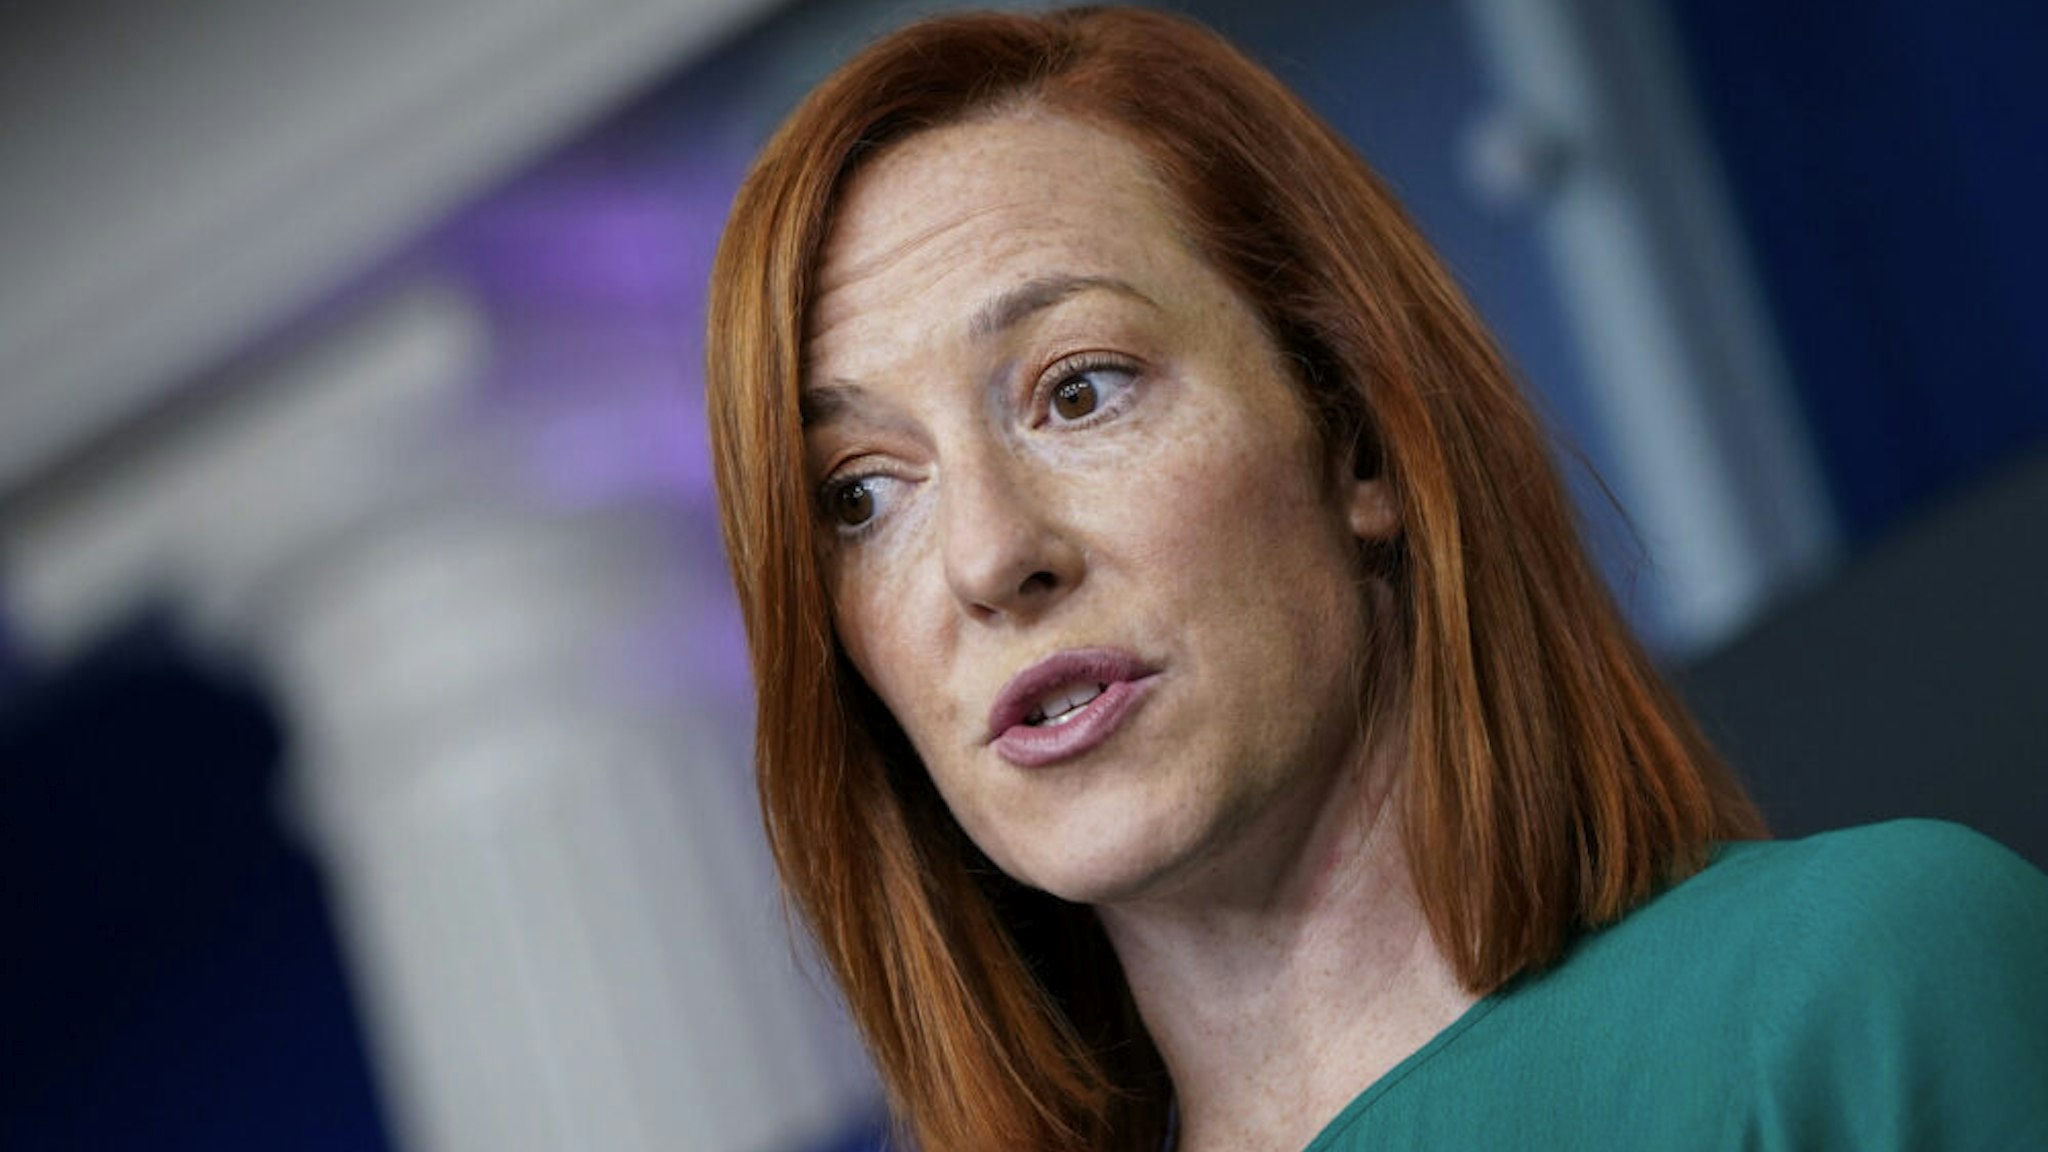 WASHINGTON, DC - JANUARY 25: White House Press Secretary Jen Psaki speaks during a daily press briefing at the White House on January 25, 2021 in Washington, DC. Later on Monday afternoon, President Joe Biden will sign an executive order aimed at boosting American manufacturing and strengthening the federal government's "Buy American" rules.